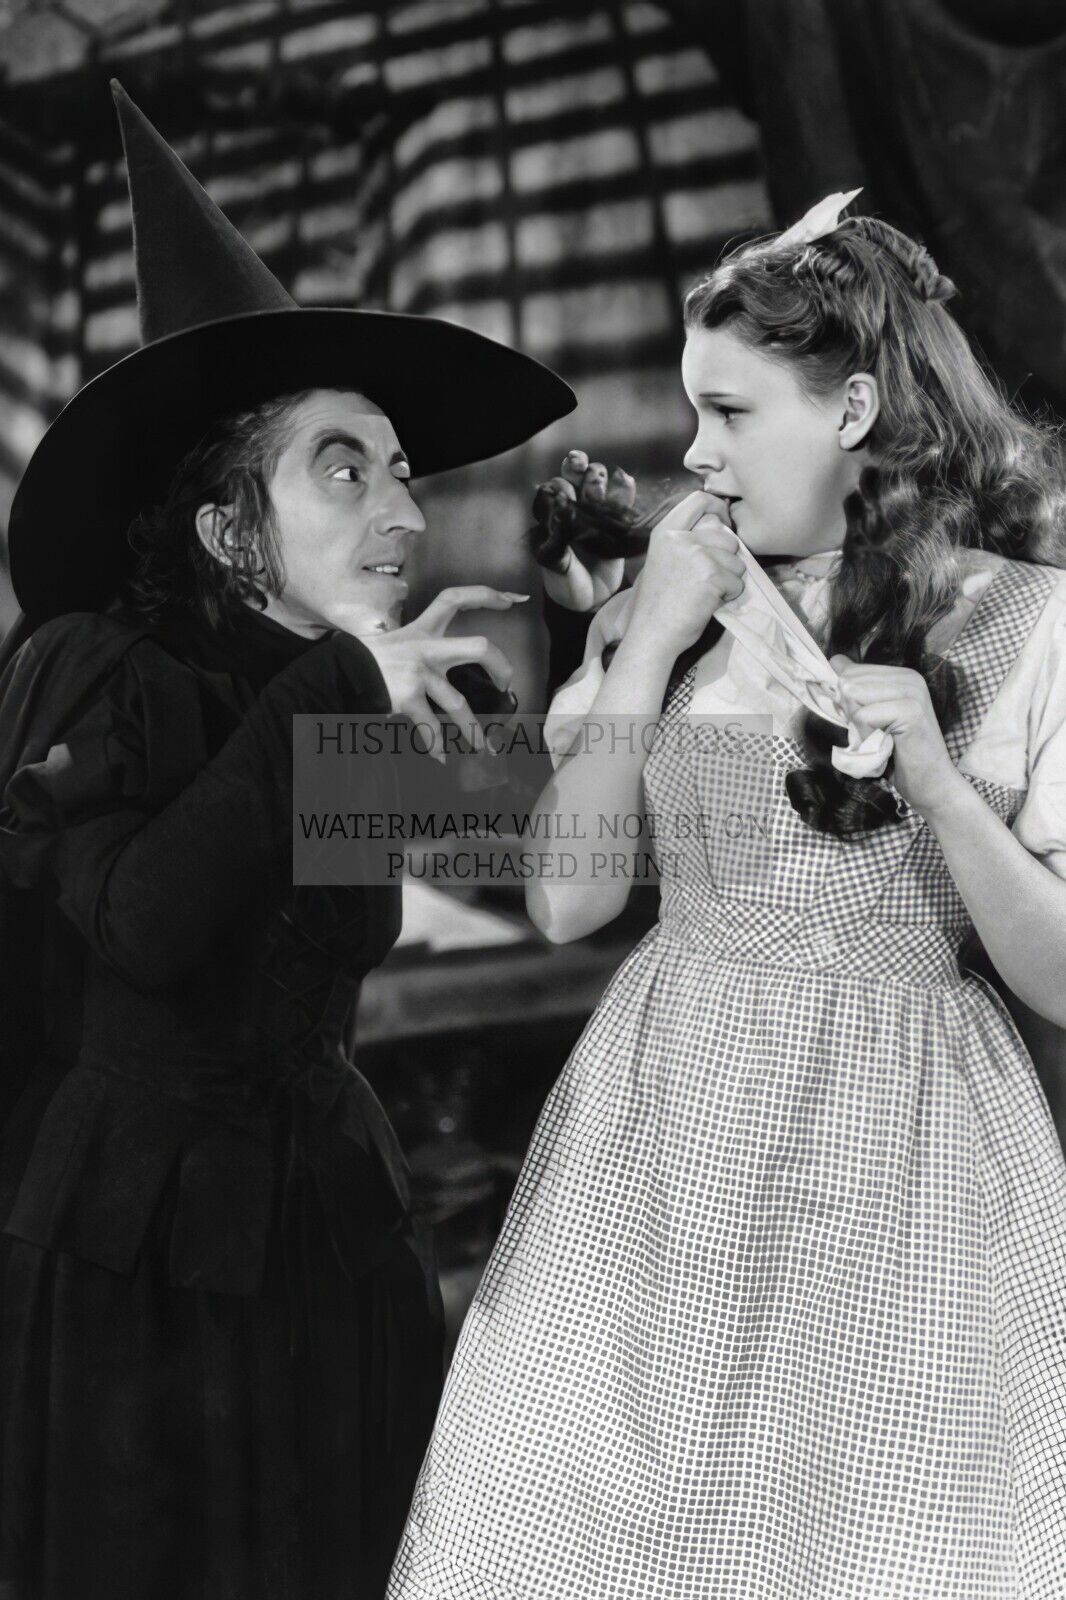 JUDY GARLAND AND THE WICKED WITCH OF THE WEST IN WIZARD OF OZ 4X6 PHOTO POSTCARD